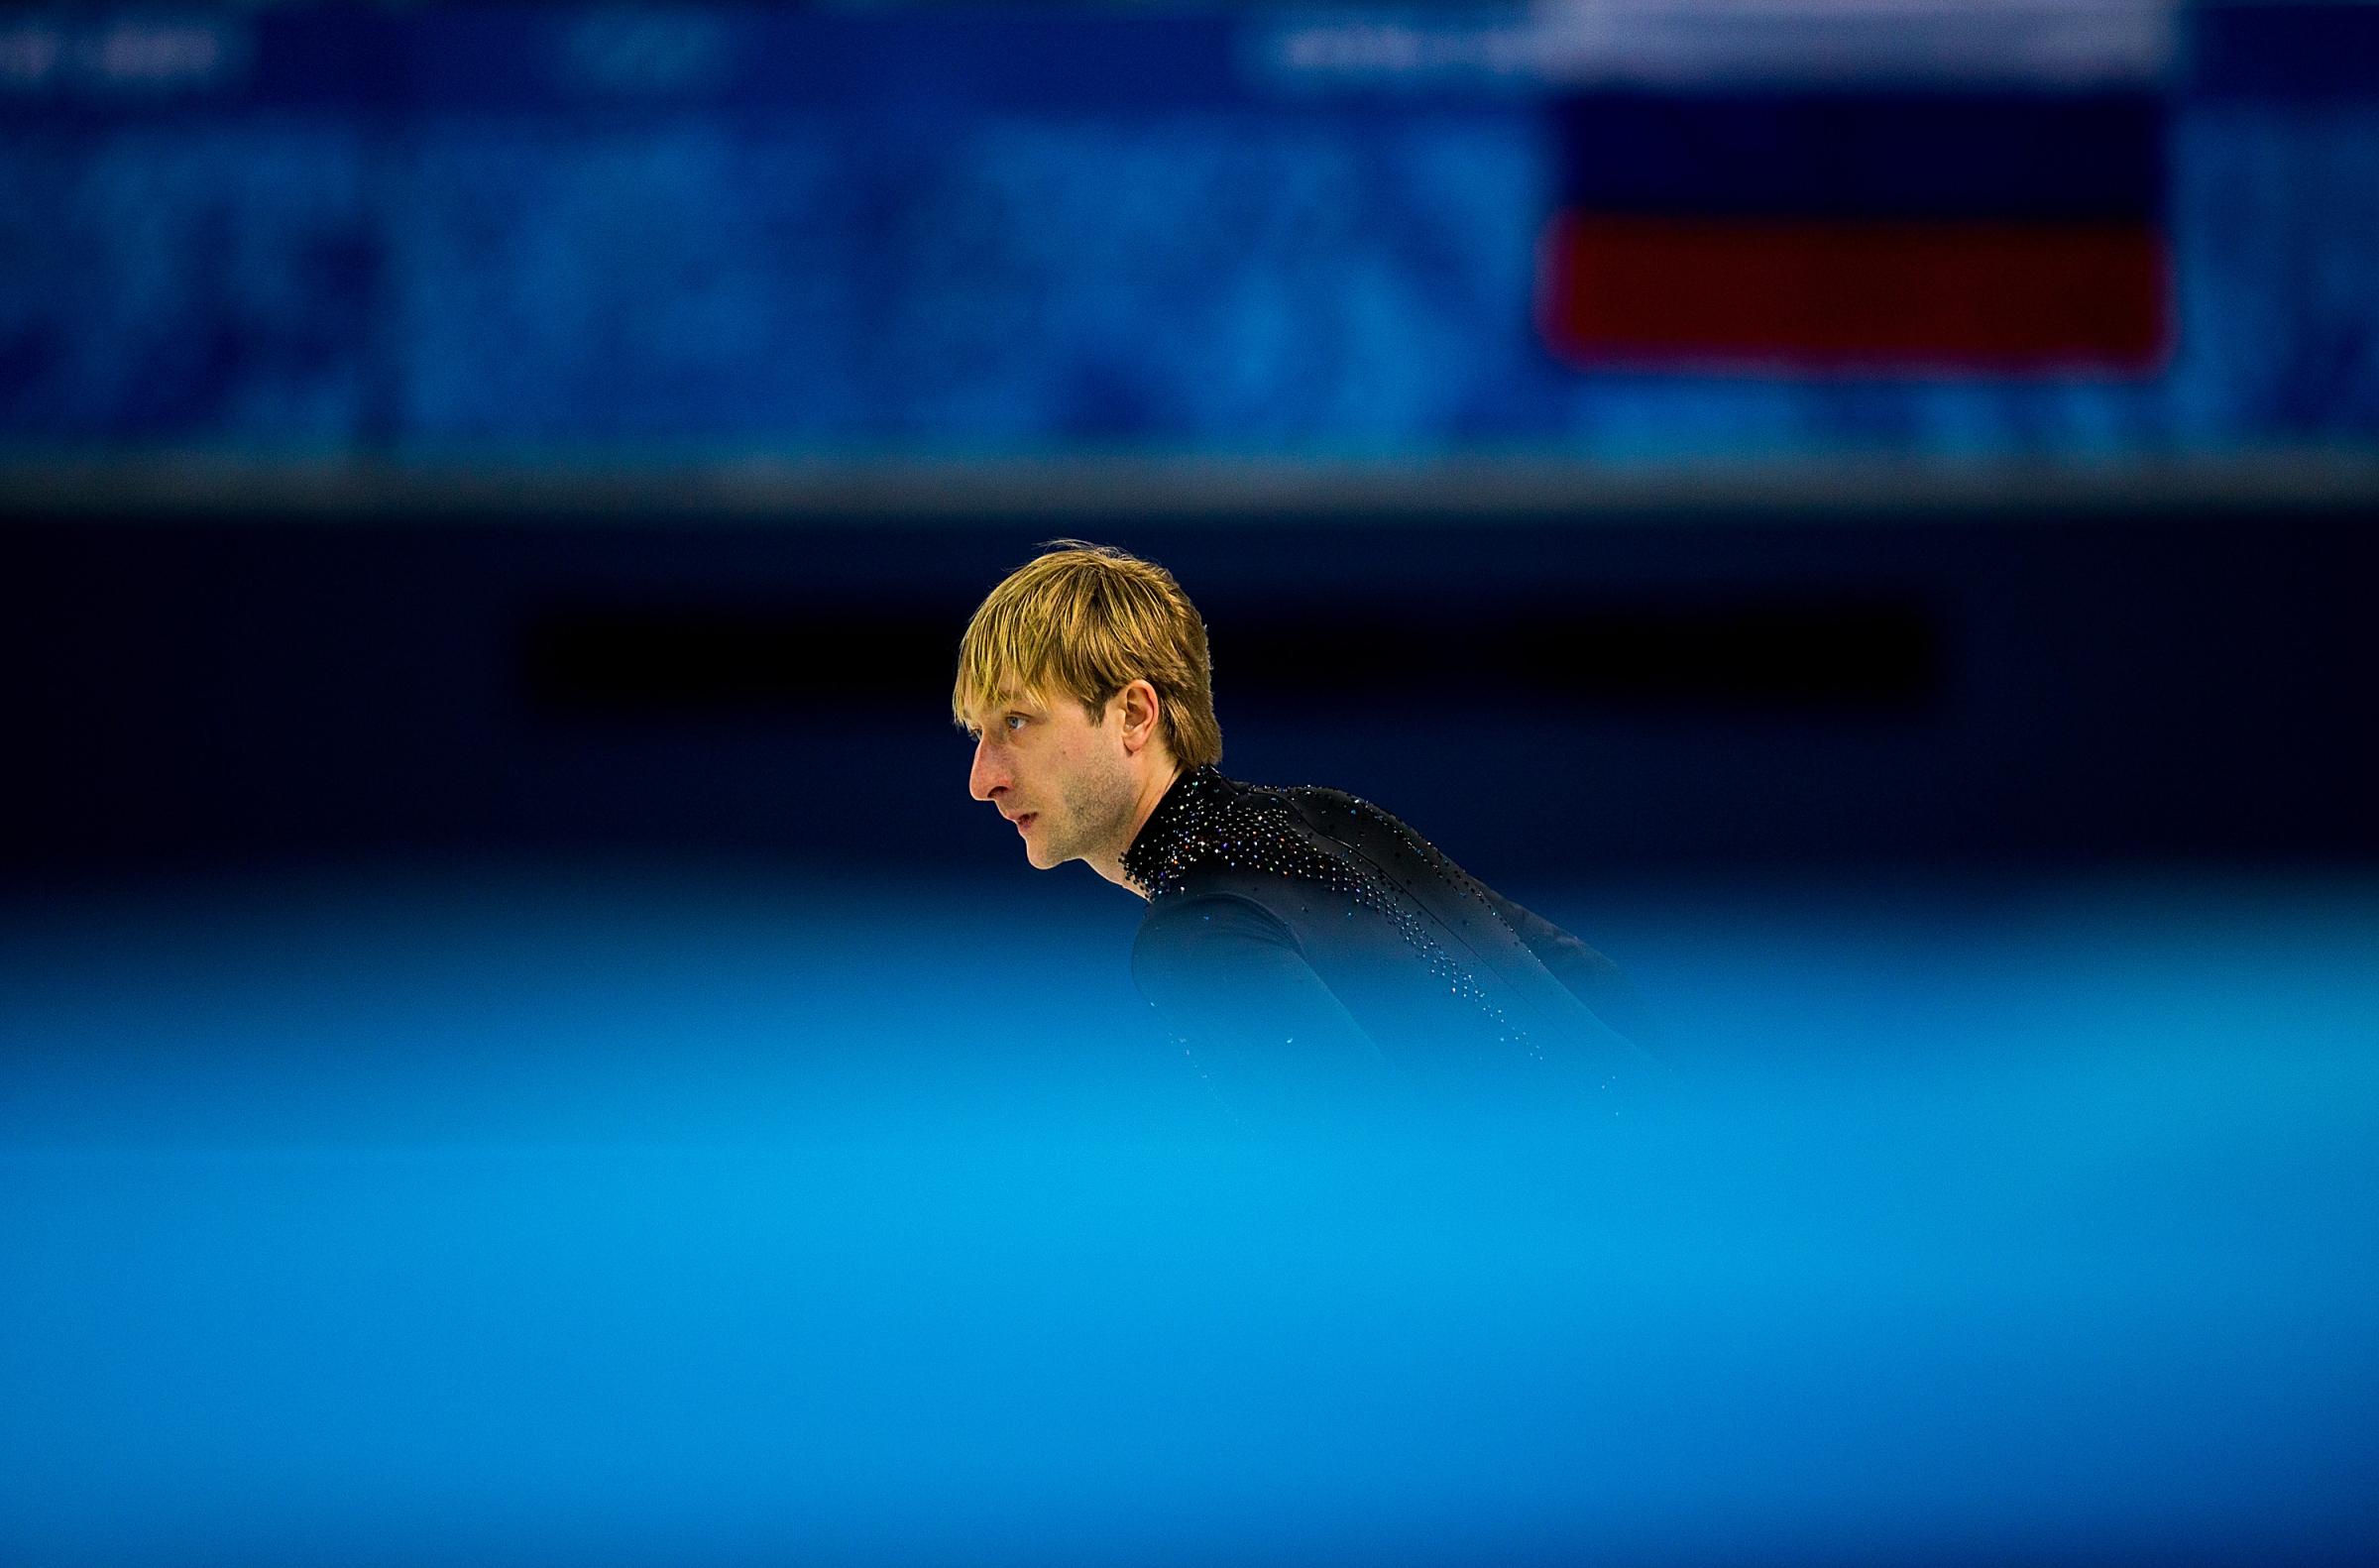 Evgeny Plyushchenko of Russia is seen at at a warm up during the Men's Figure Skating Short Program.